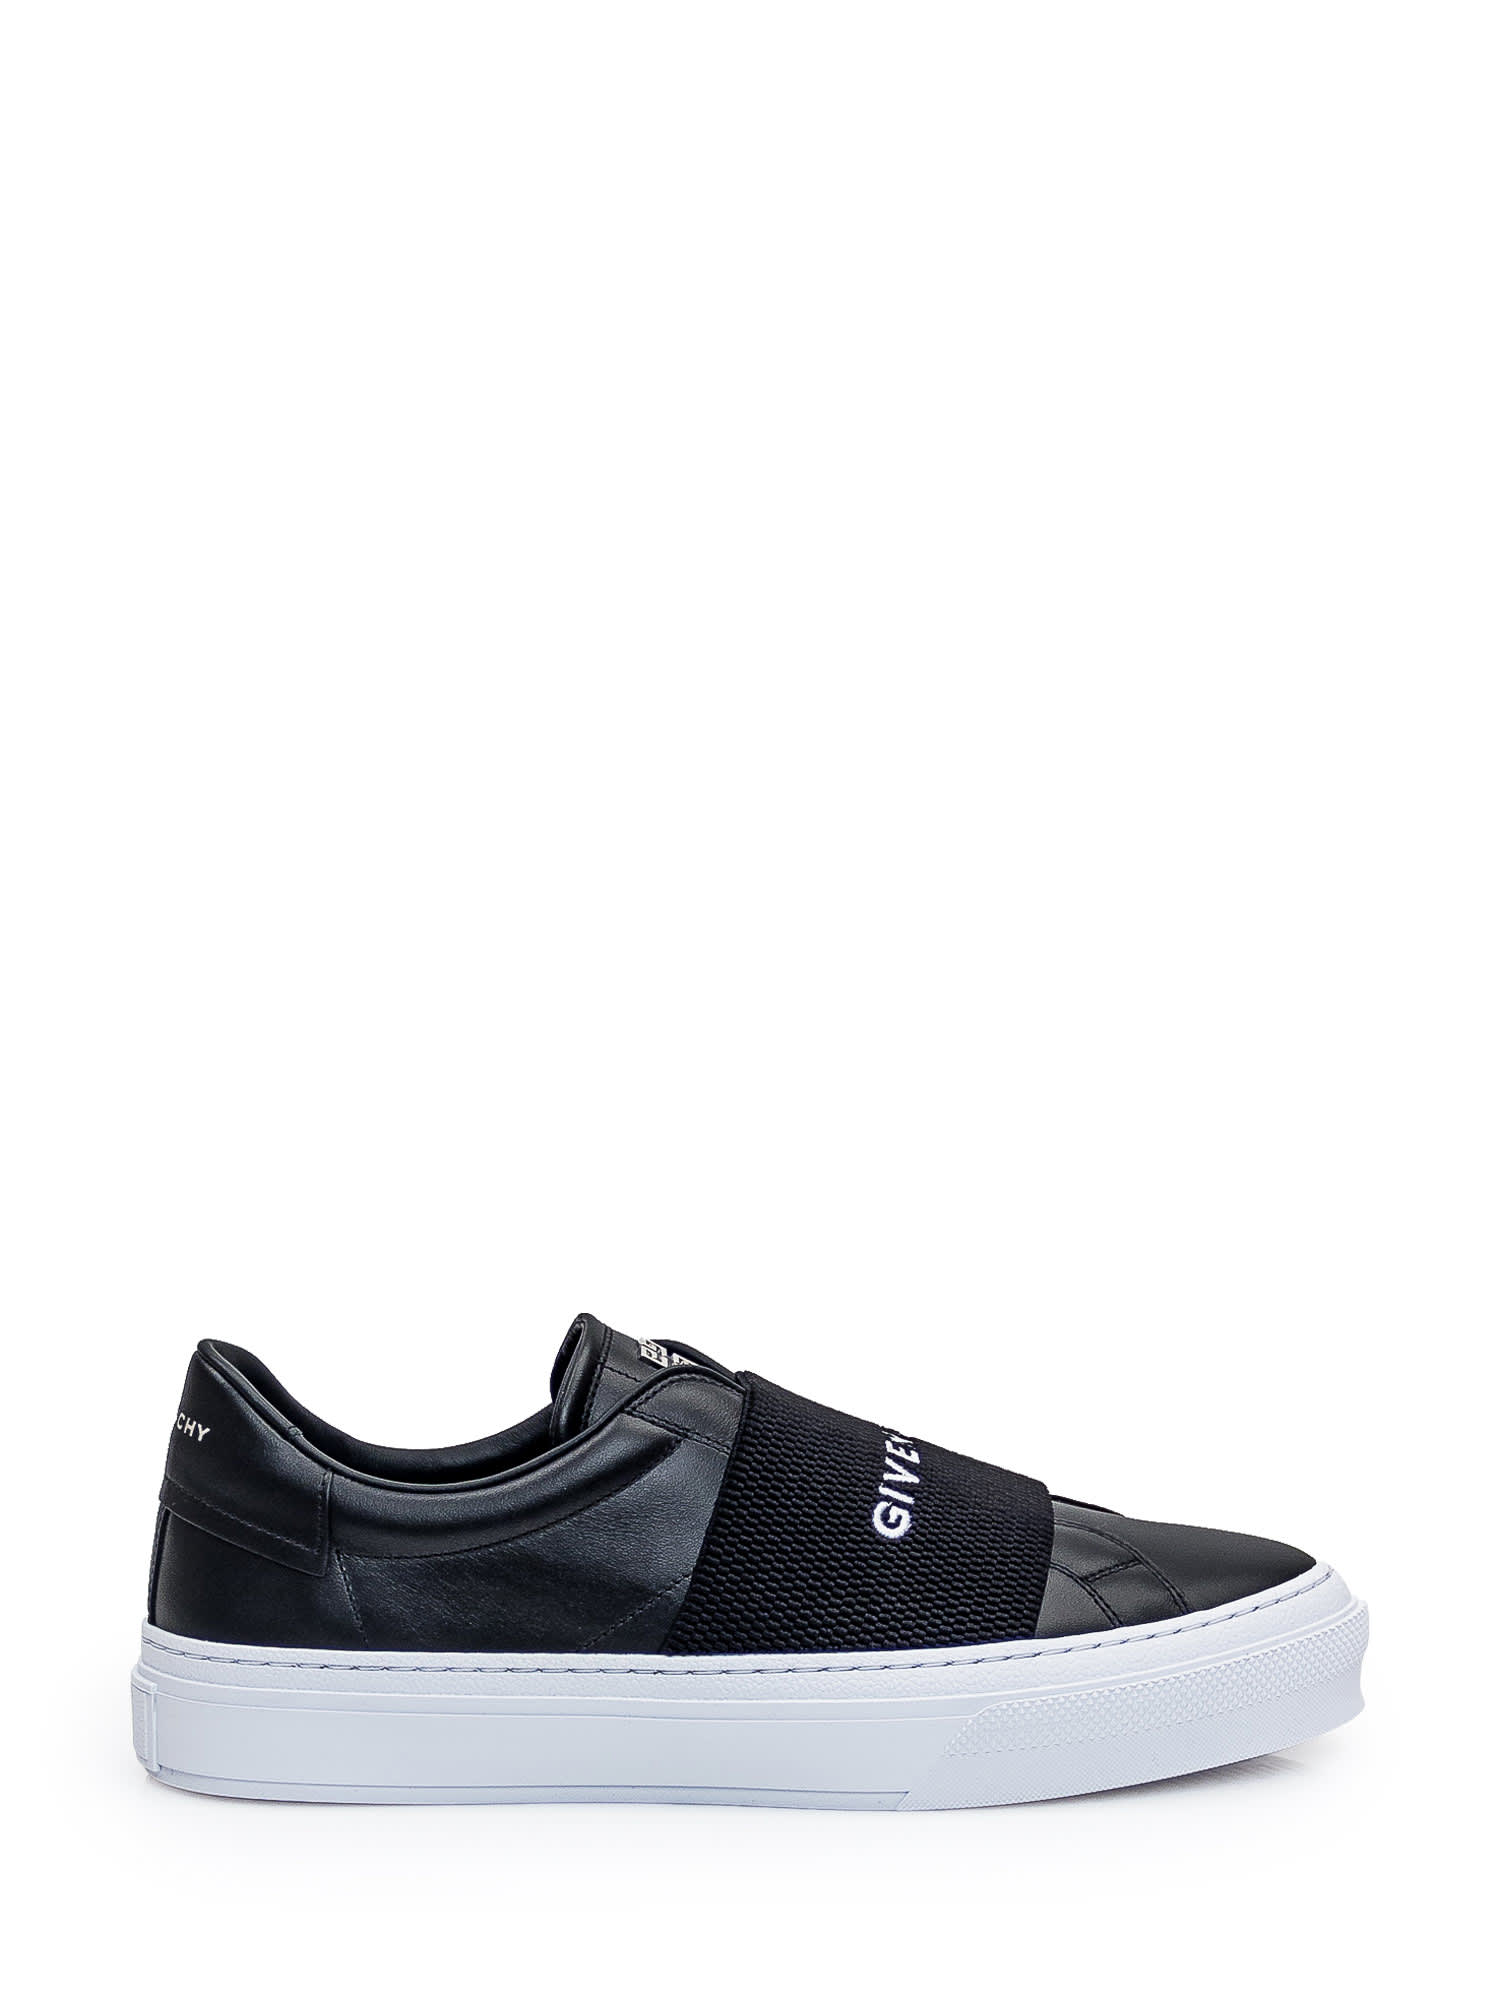 Shop Givenchy City Sport Sneaker In Black